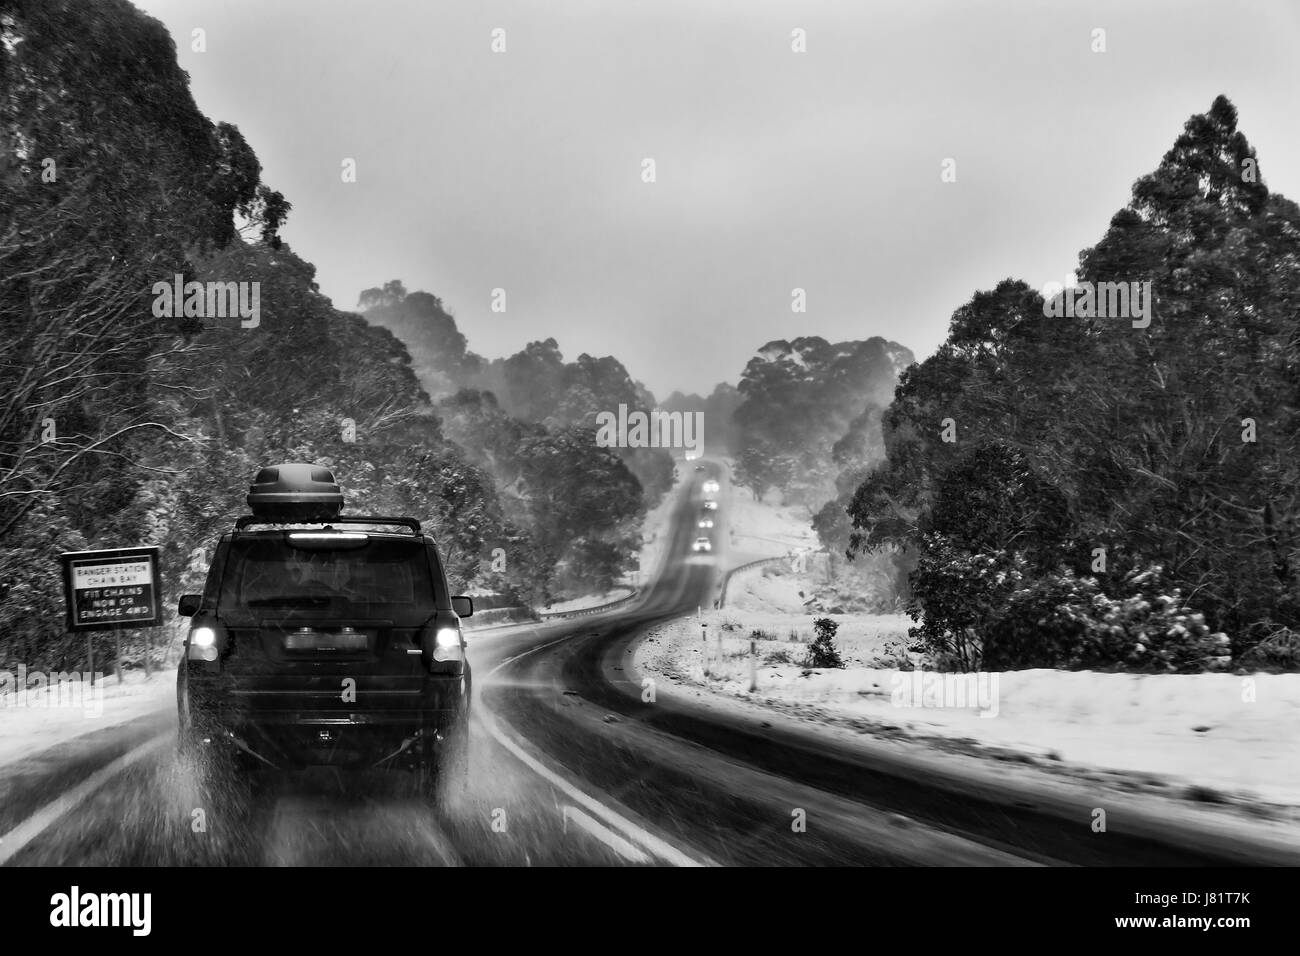 Slippery remote mountain road in Thredbo valley during snowfall and storm late at sunset. Popular skiing resort destination for australians in Snow mo Stock Photo